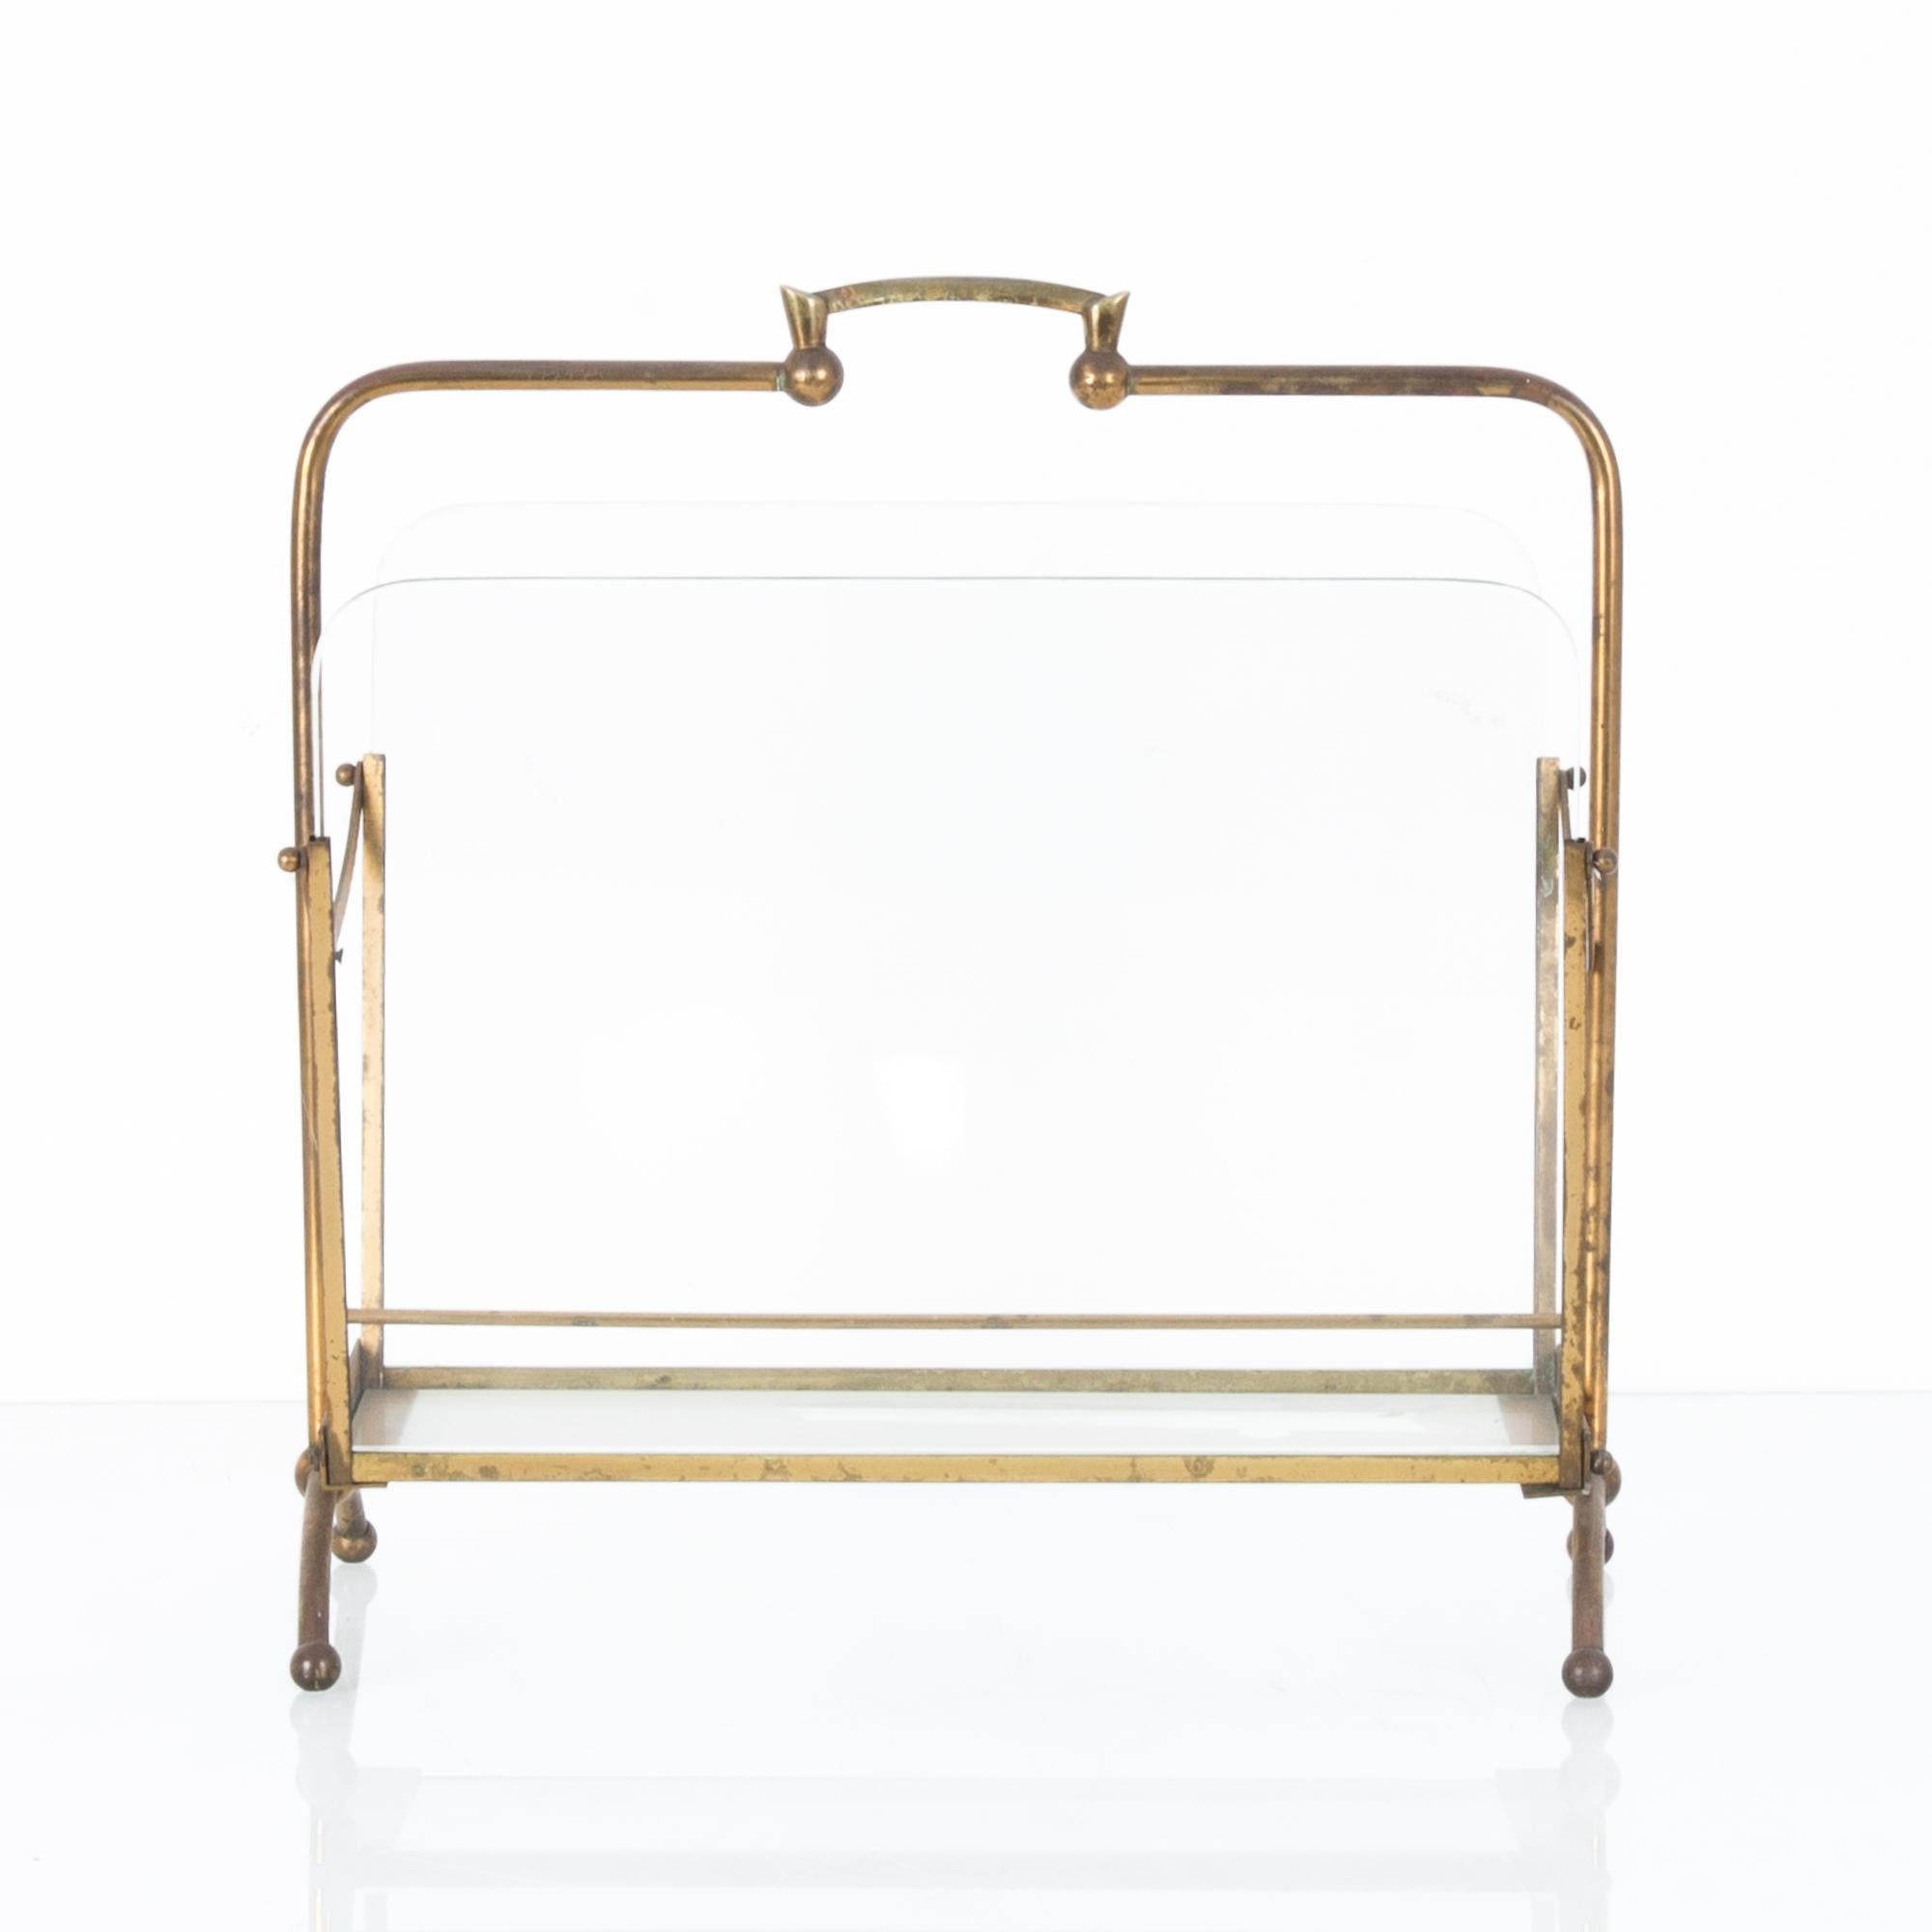 This glass and metal newspaper stand was made in France, circa 1940. The rounded edges and arcs of the legs and sides give this rack a pleasing form, while details such as the handle and ball feet add charm. Finding your newspapers and magazines